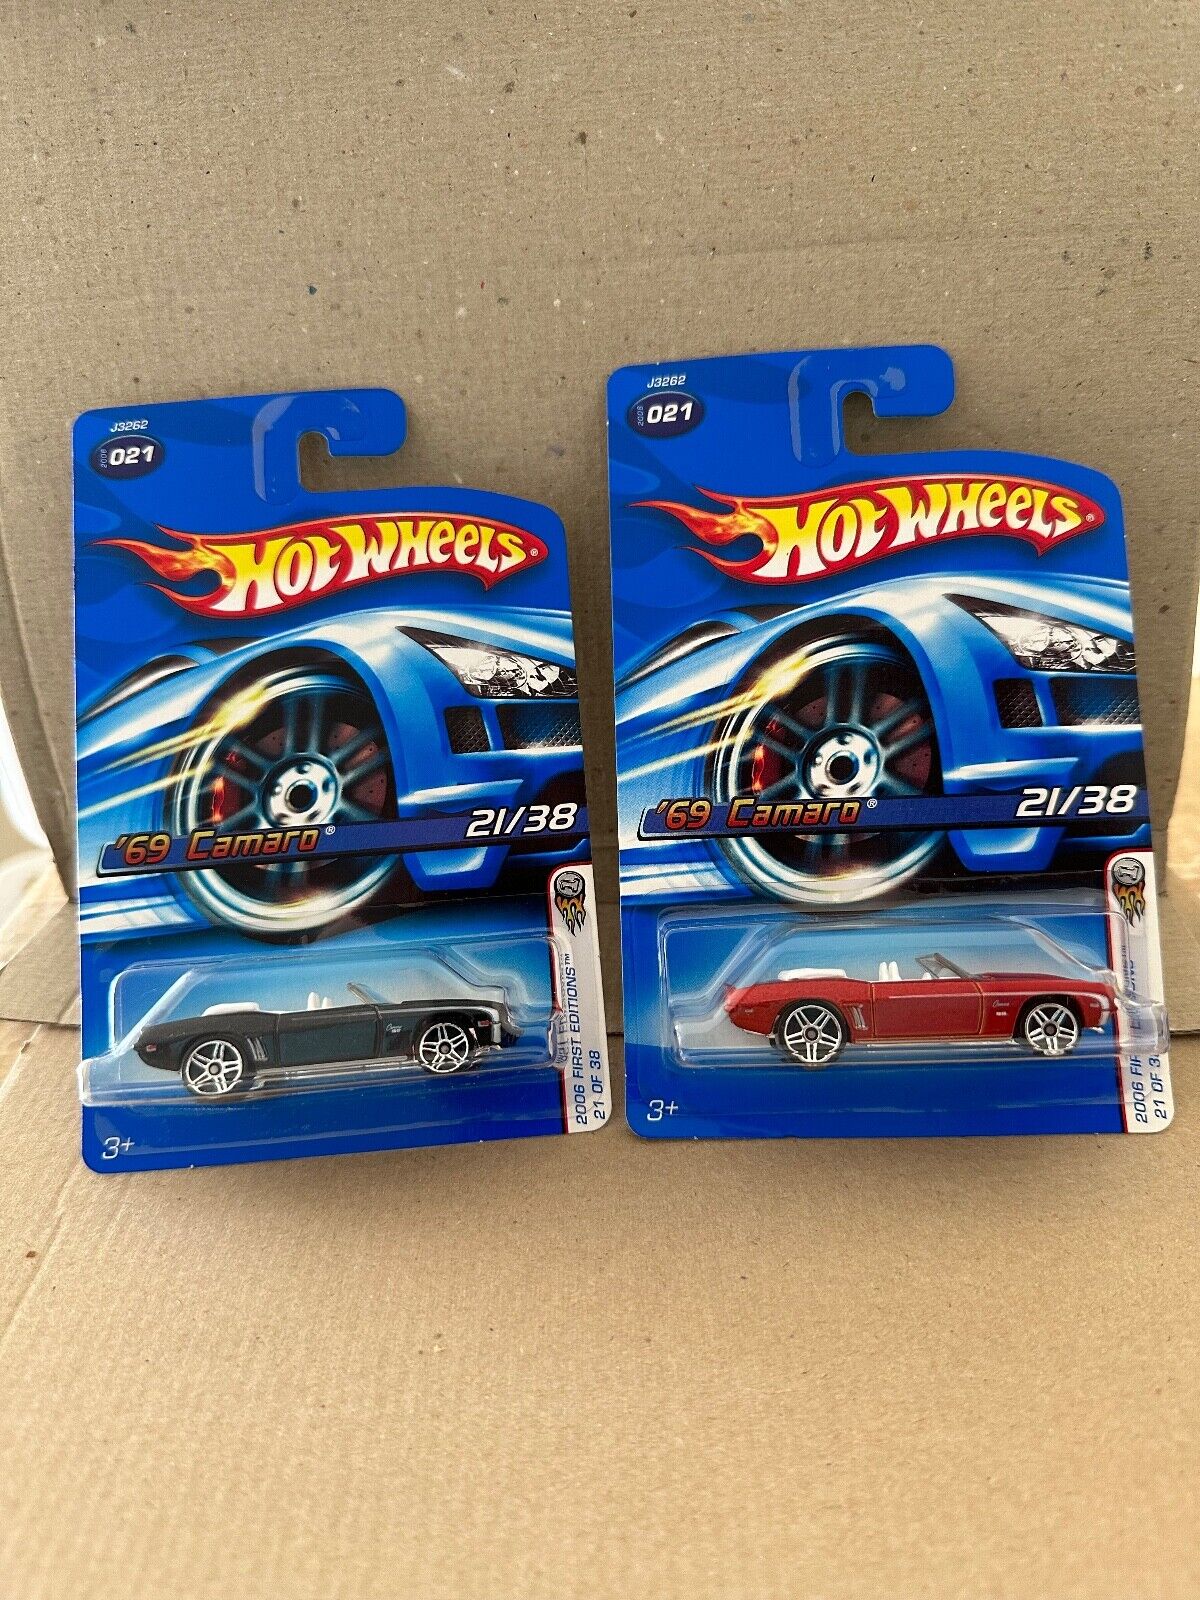 Hot Wheels Lot 2x  '69 Camaro 2006 First Editions #21/38 Black & Red HW12